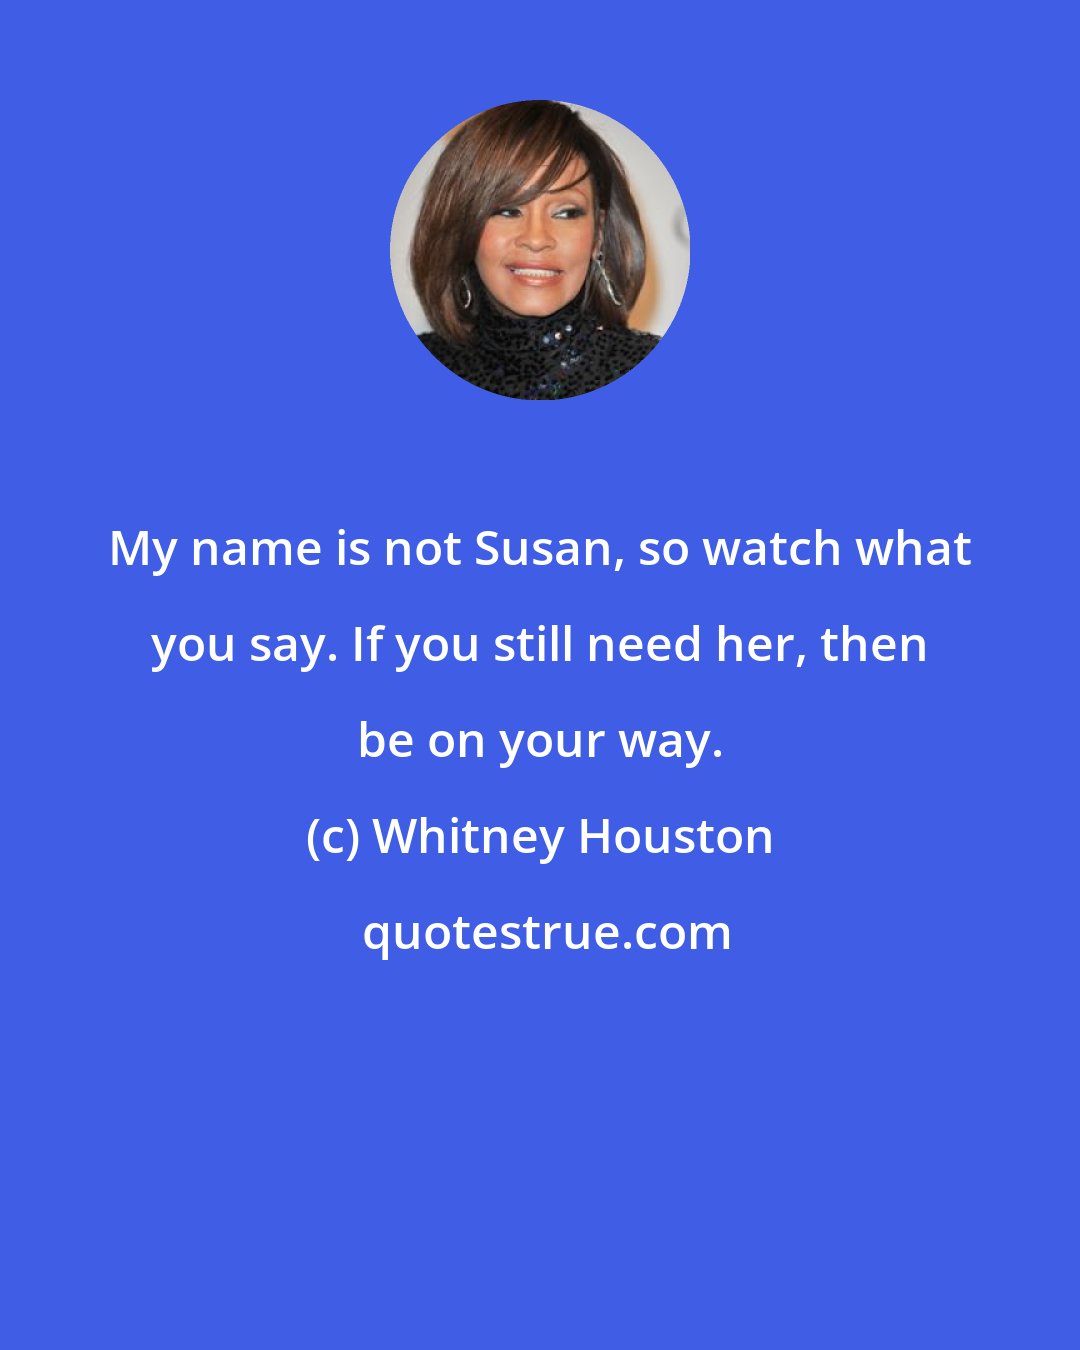 Whitney Houston: My name is not Susan, so watch what you say. If you still need her, then be on your way.